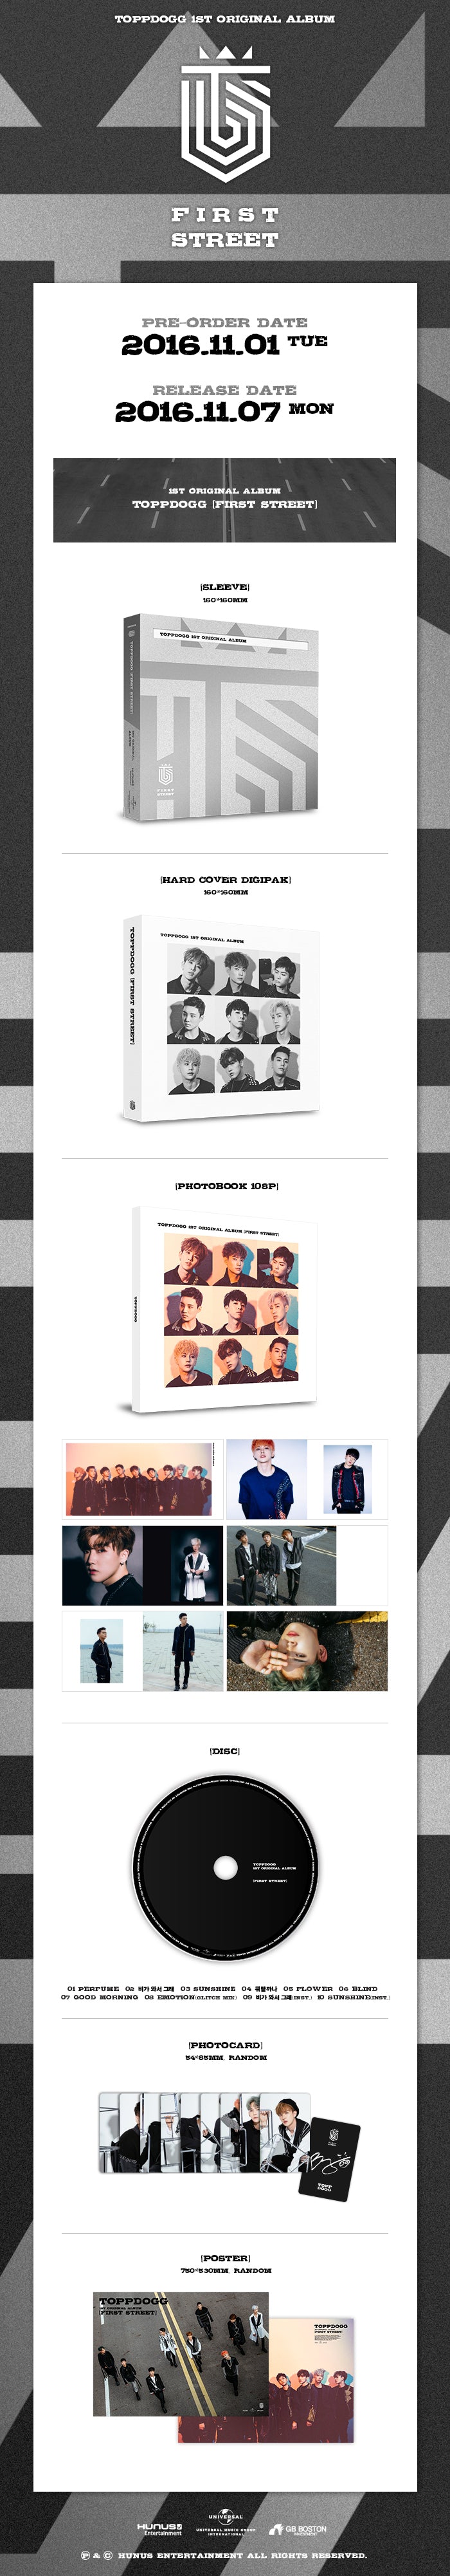 1 CD
1 Photo Book (108 pages)
1 Photo Card